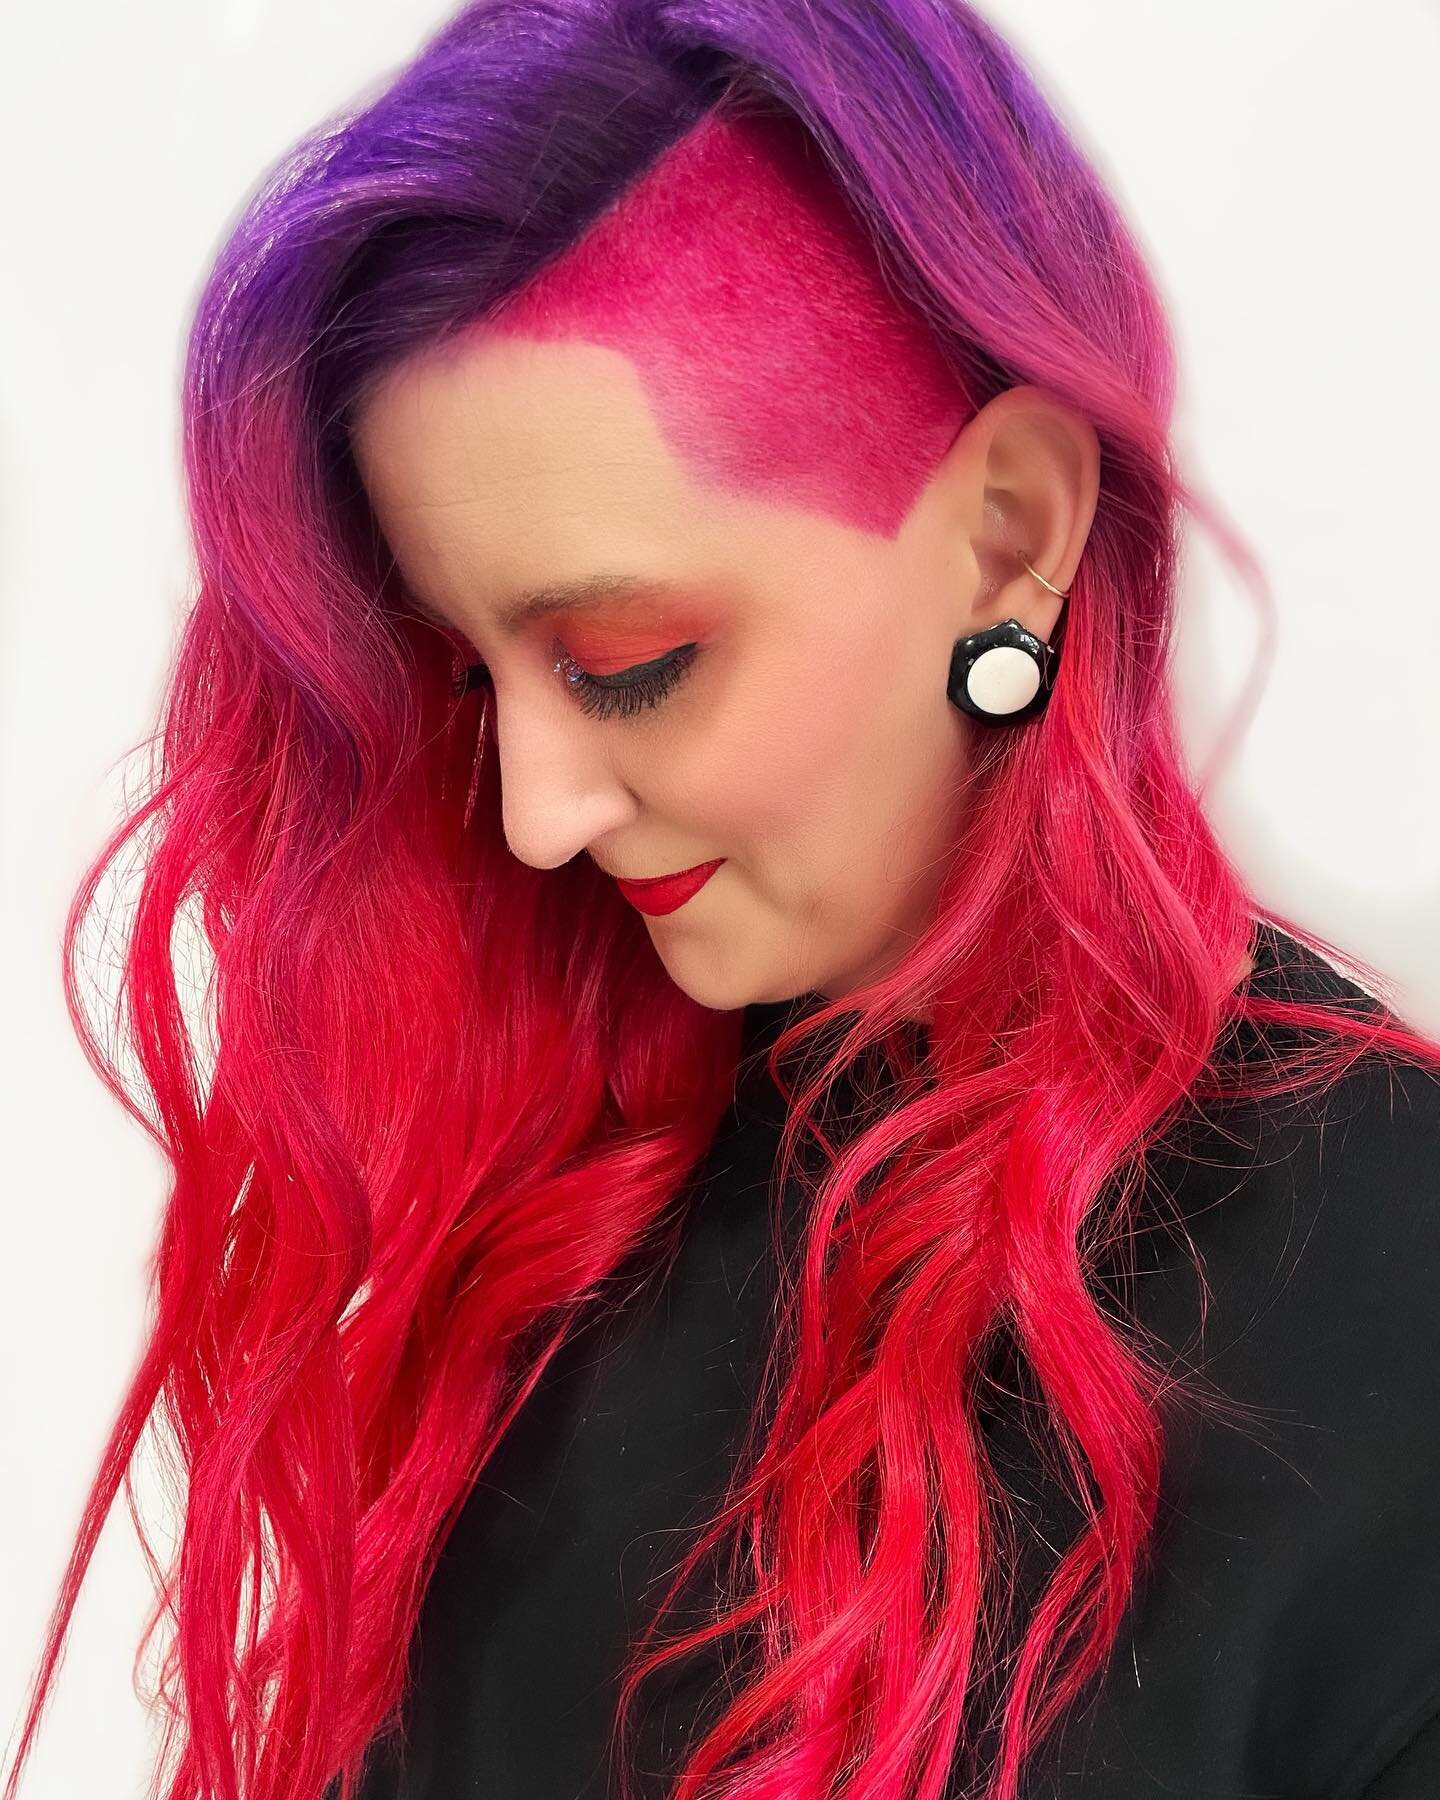 🤍EVERYTHING is temporary🤍 

Hard times come and go and you gotta breathe through it and surround yourself with good people that make you smile. 

#pinkhair #behindthechair #beautylaunchpad #evo #surfacehairhealth #haircolor #hairstylist